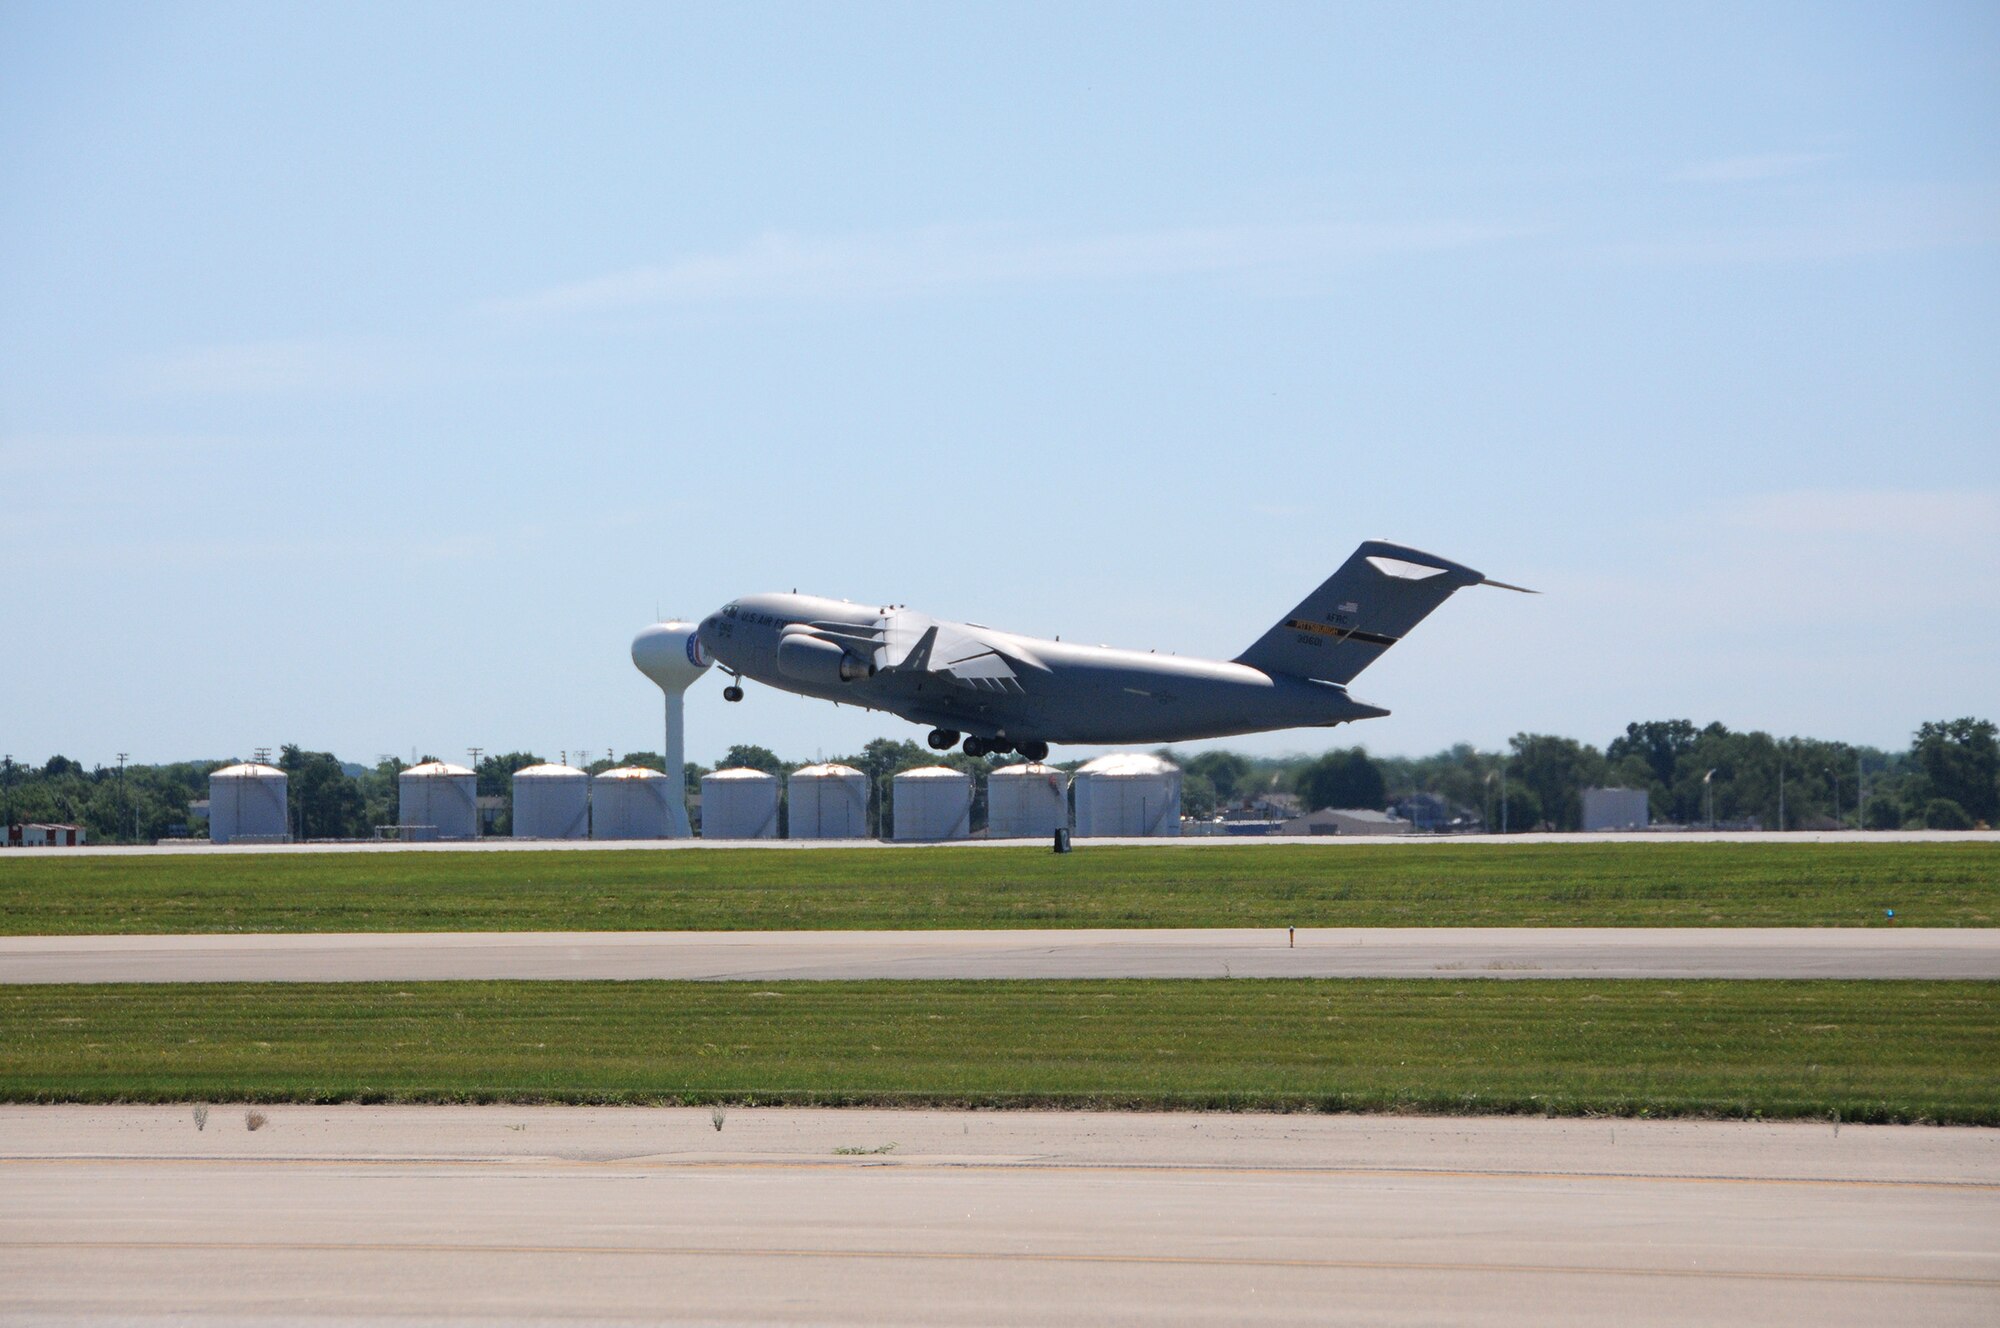 A C-17 Globemaster III assigned to the 911th Airlift Wing, Pittsburgh International Airport Air Reserve Station, Pennsylvania takes off from Wright-Patterson Air Force Base, June 14, 2018.